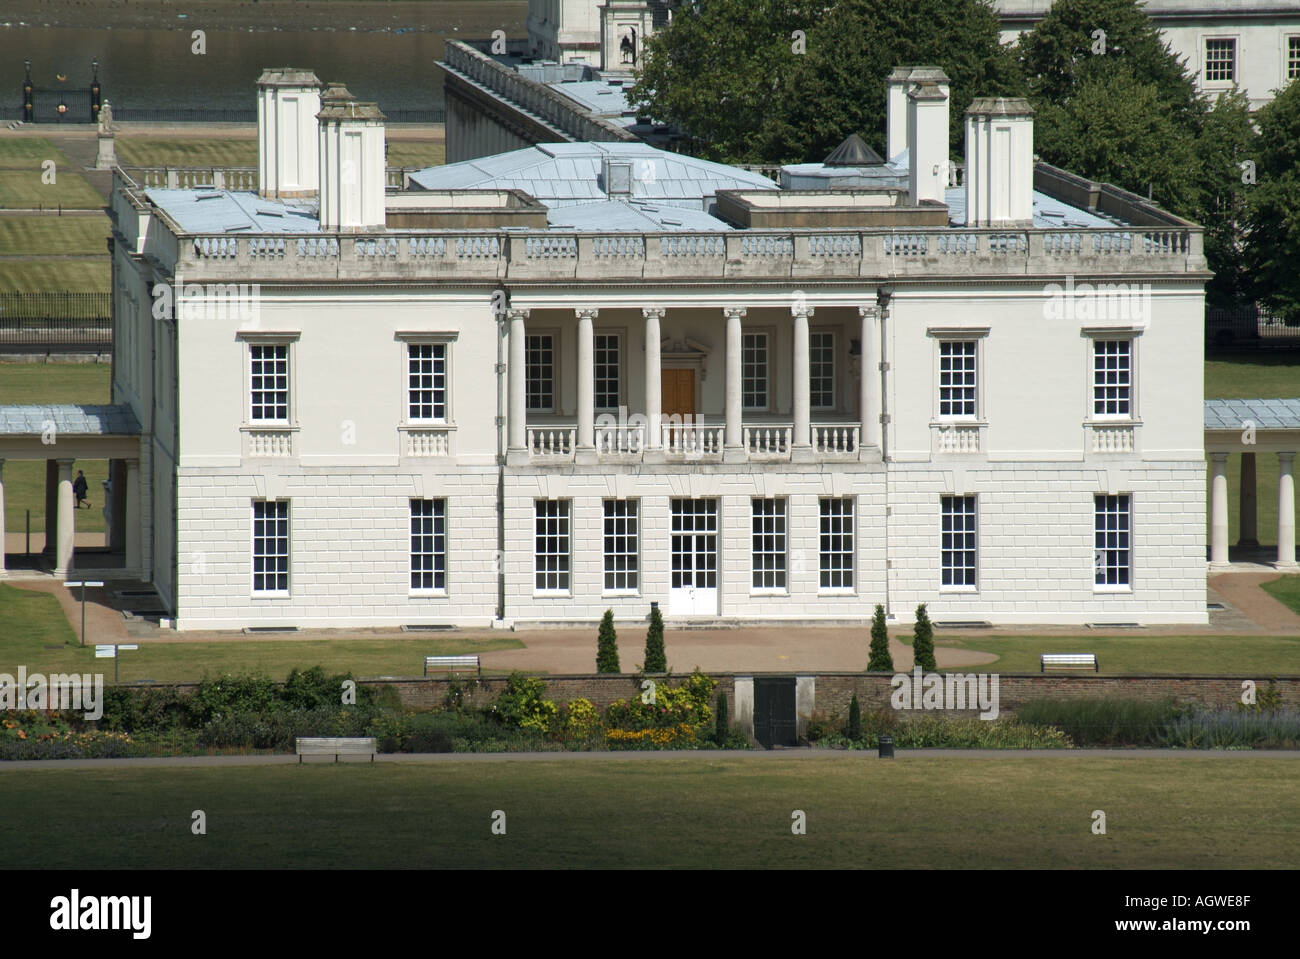 Queen's House Inigo Jones' masterpiece & first Classical building in UK part of the Royal Museums Greenwich in Greenwich Park London England UK Stock Photo